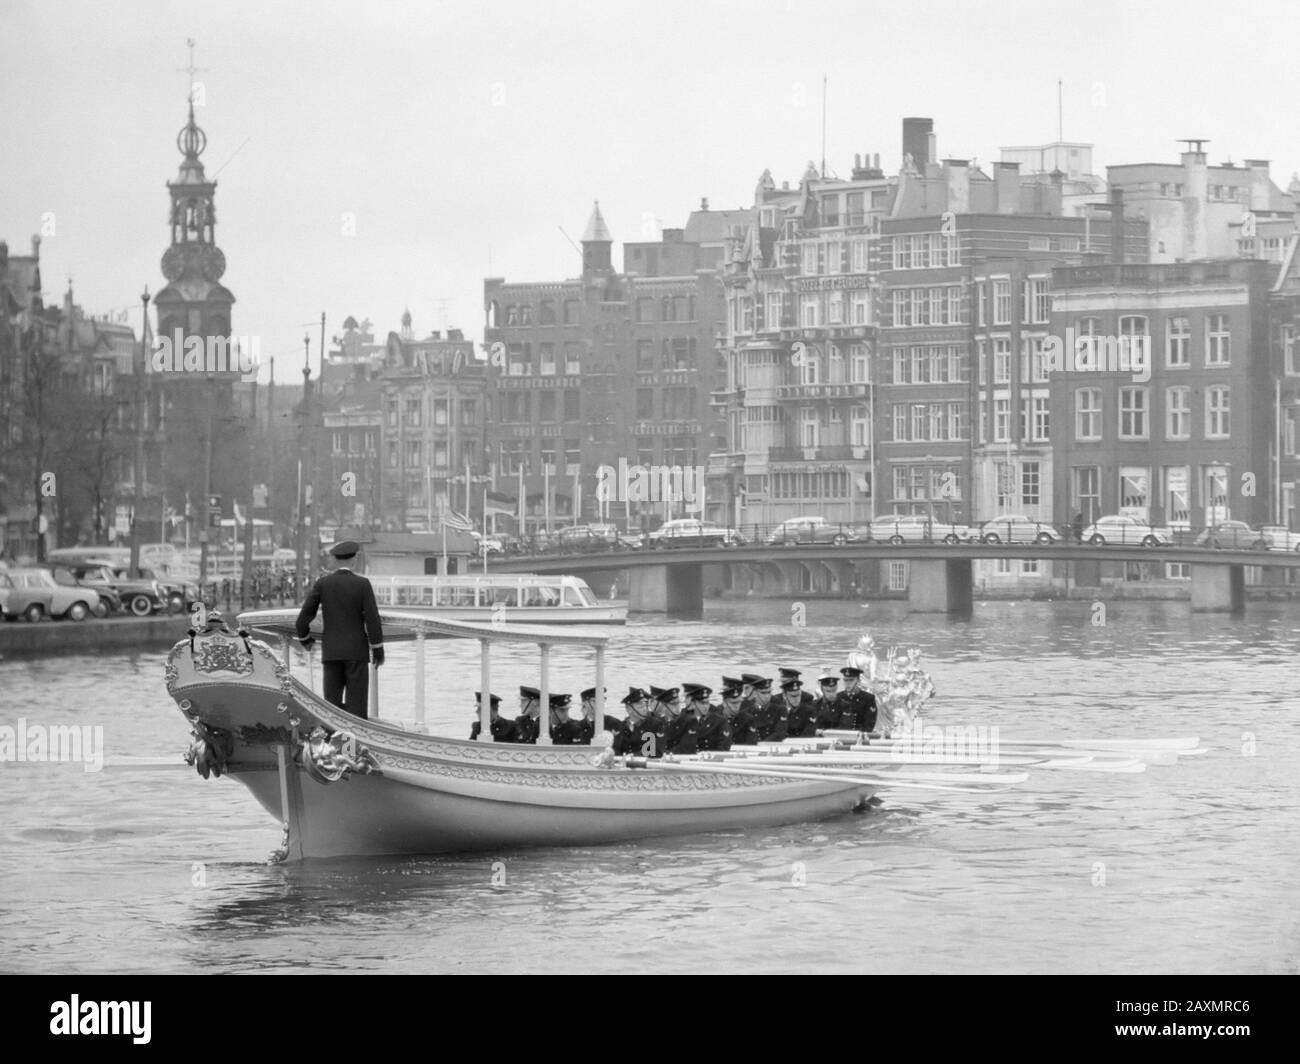 King Sloop trials on the Amstel April 27, 1962 Stock Photo